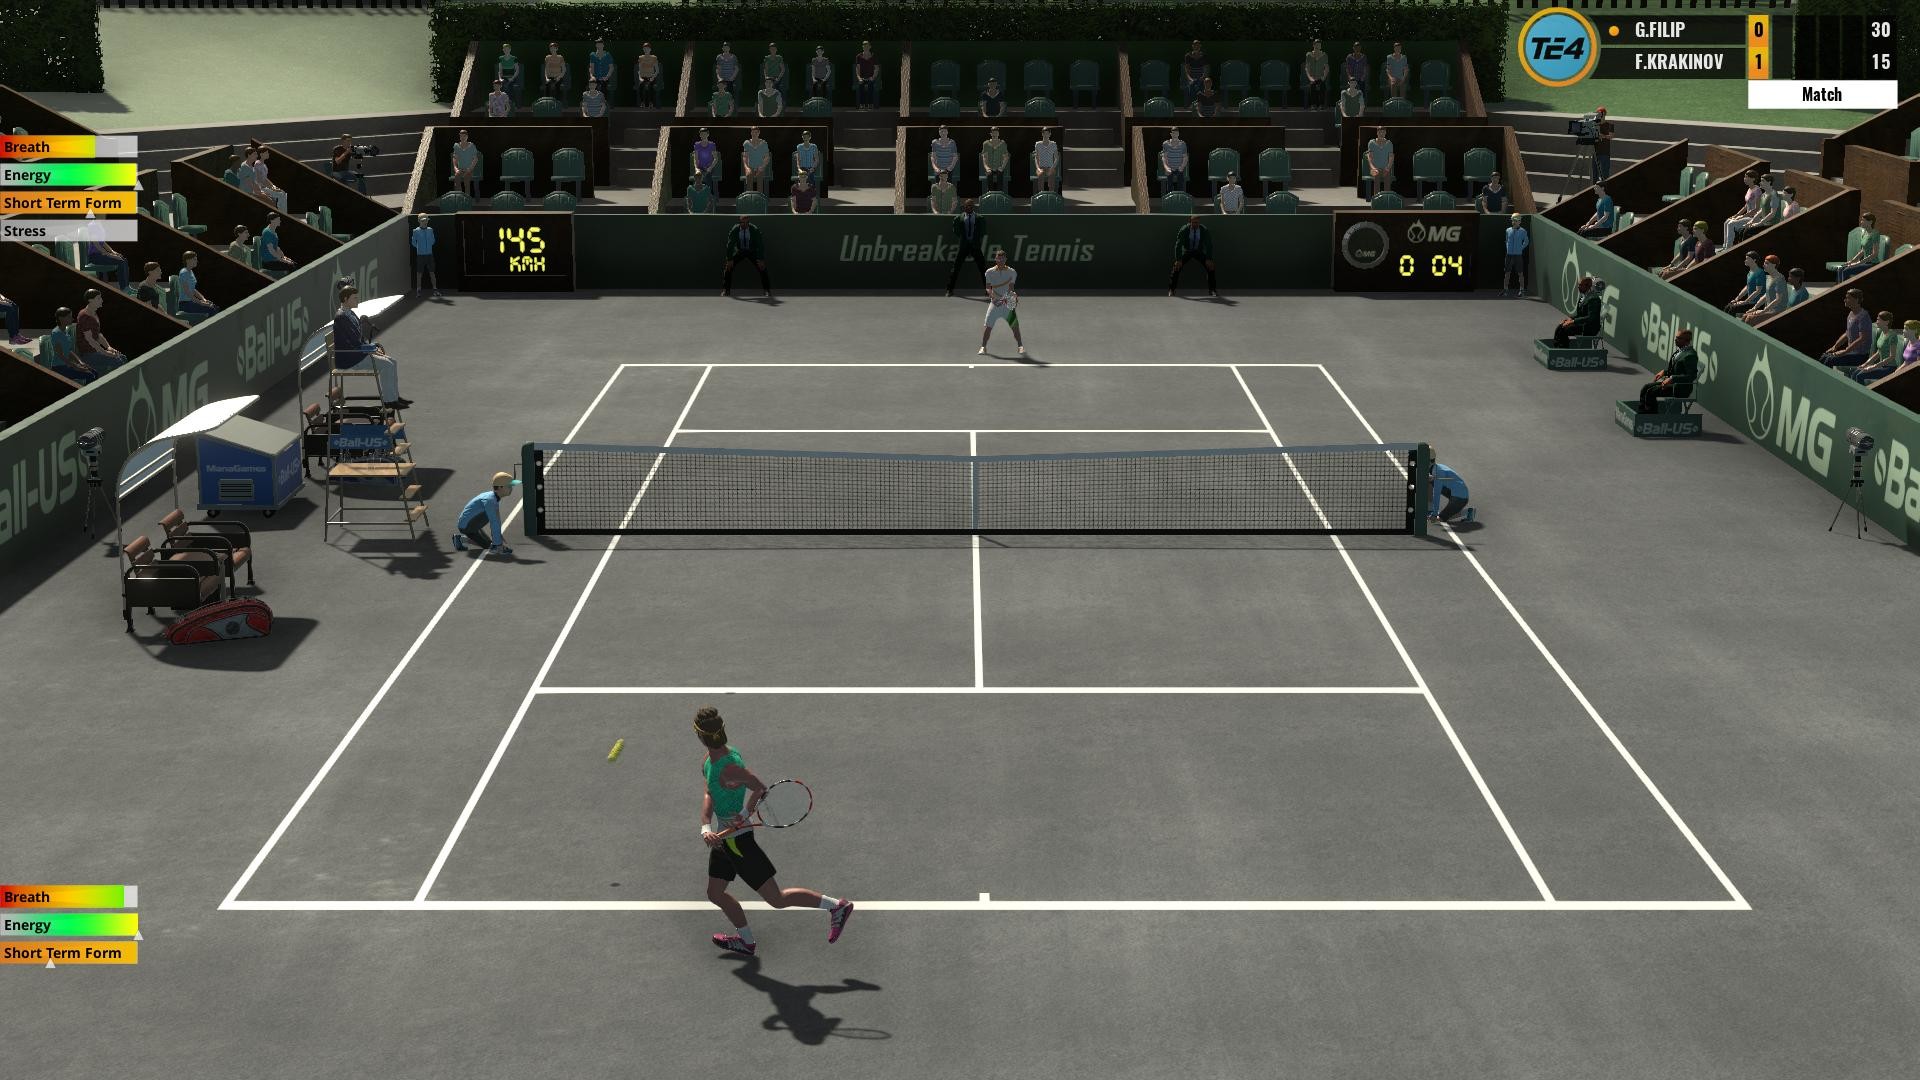 Save 25% on Tennis Elbow 4 on Steam